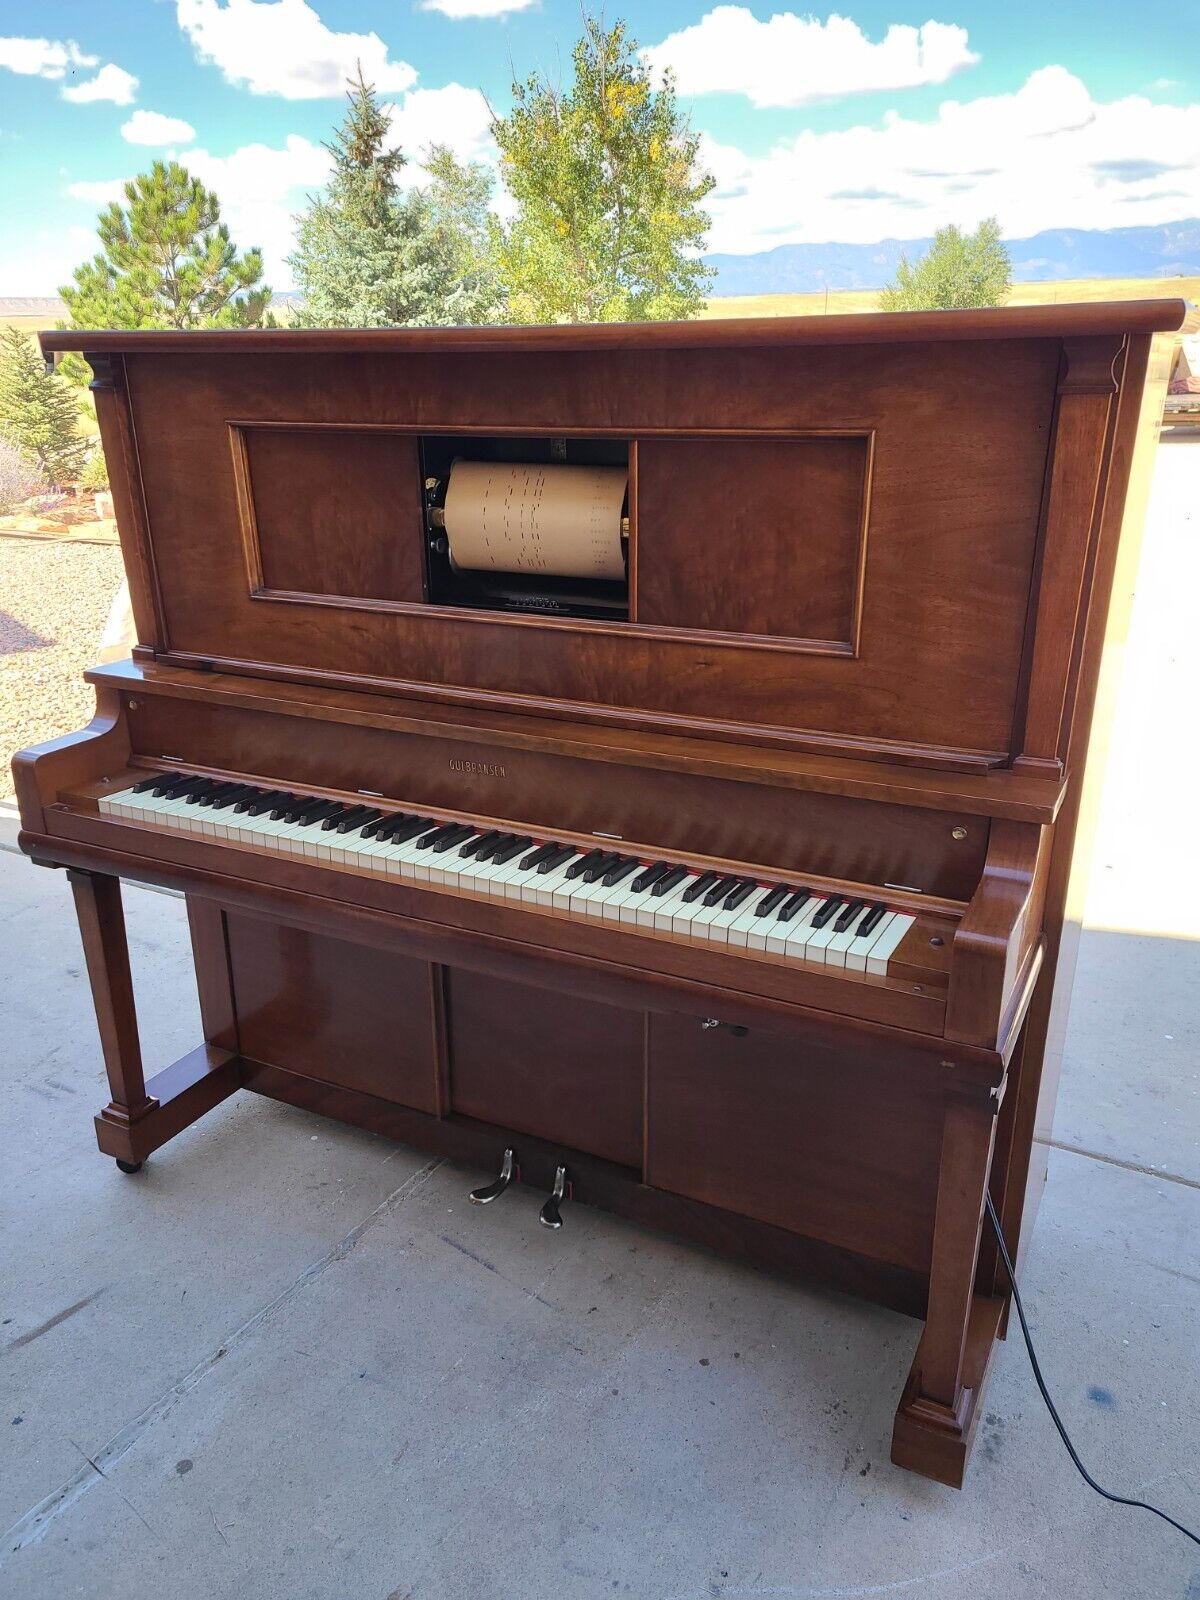 Antique 1915 Gulbransen Self Playing Player Piano, Works And Sounds Great